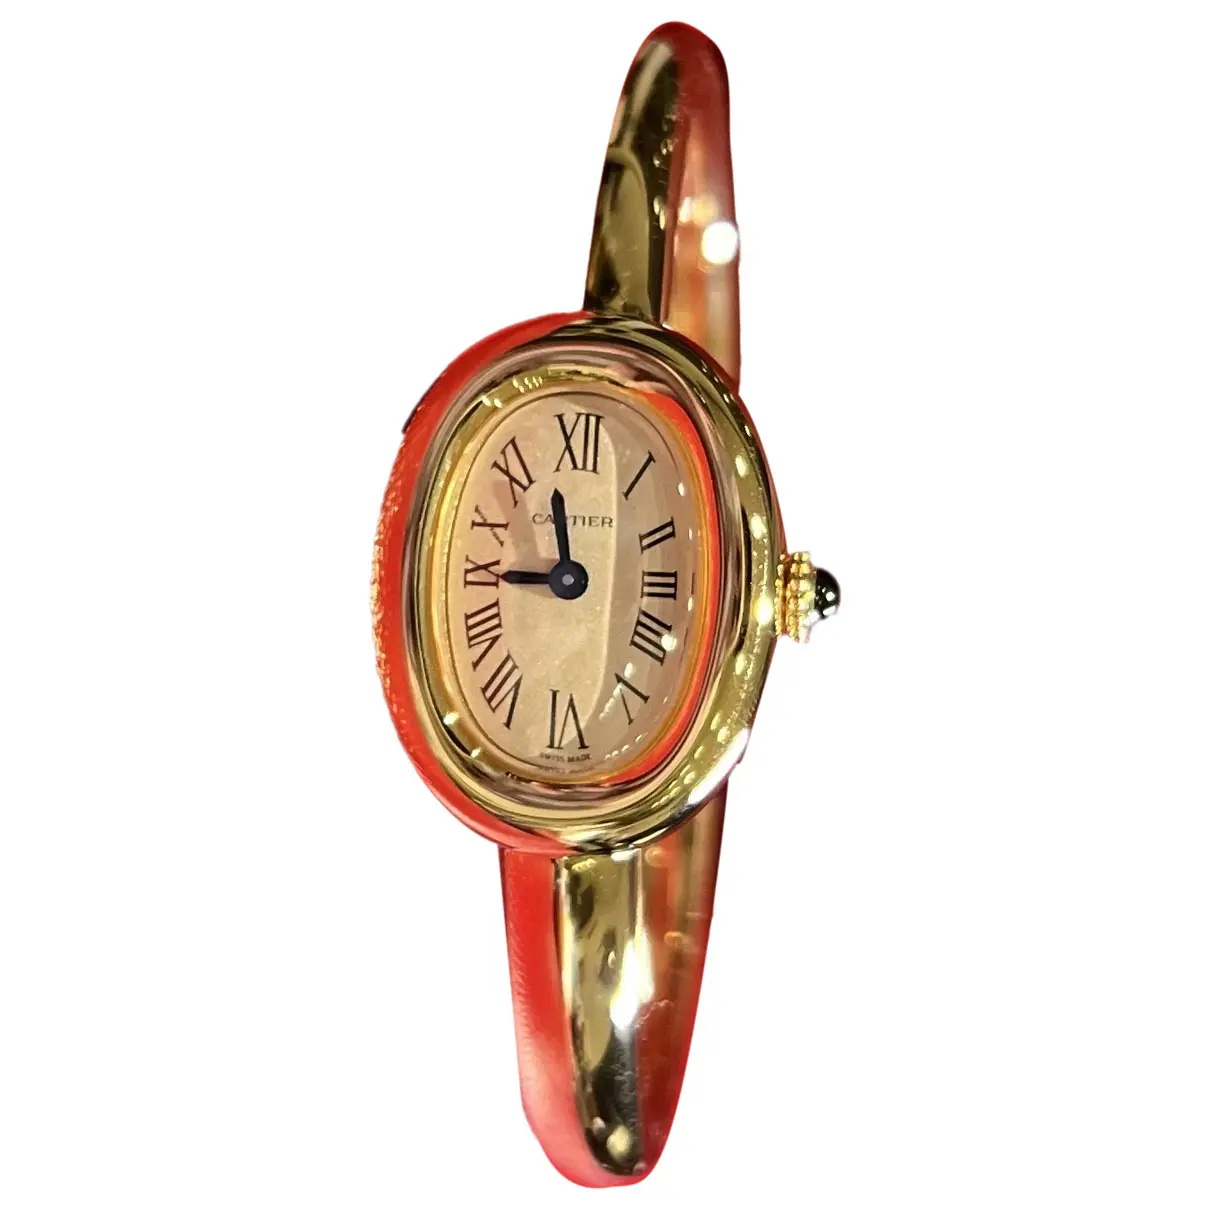 Baignoire yellow gold watch